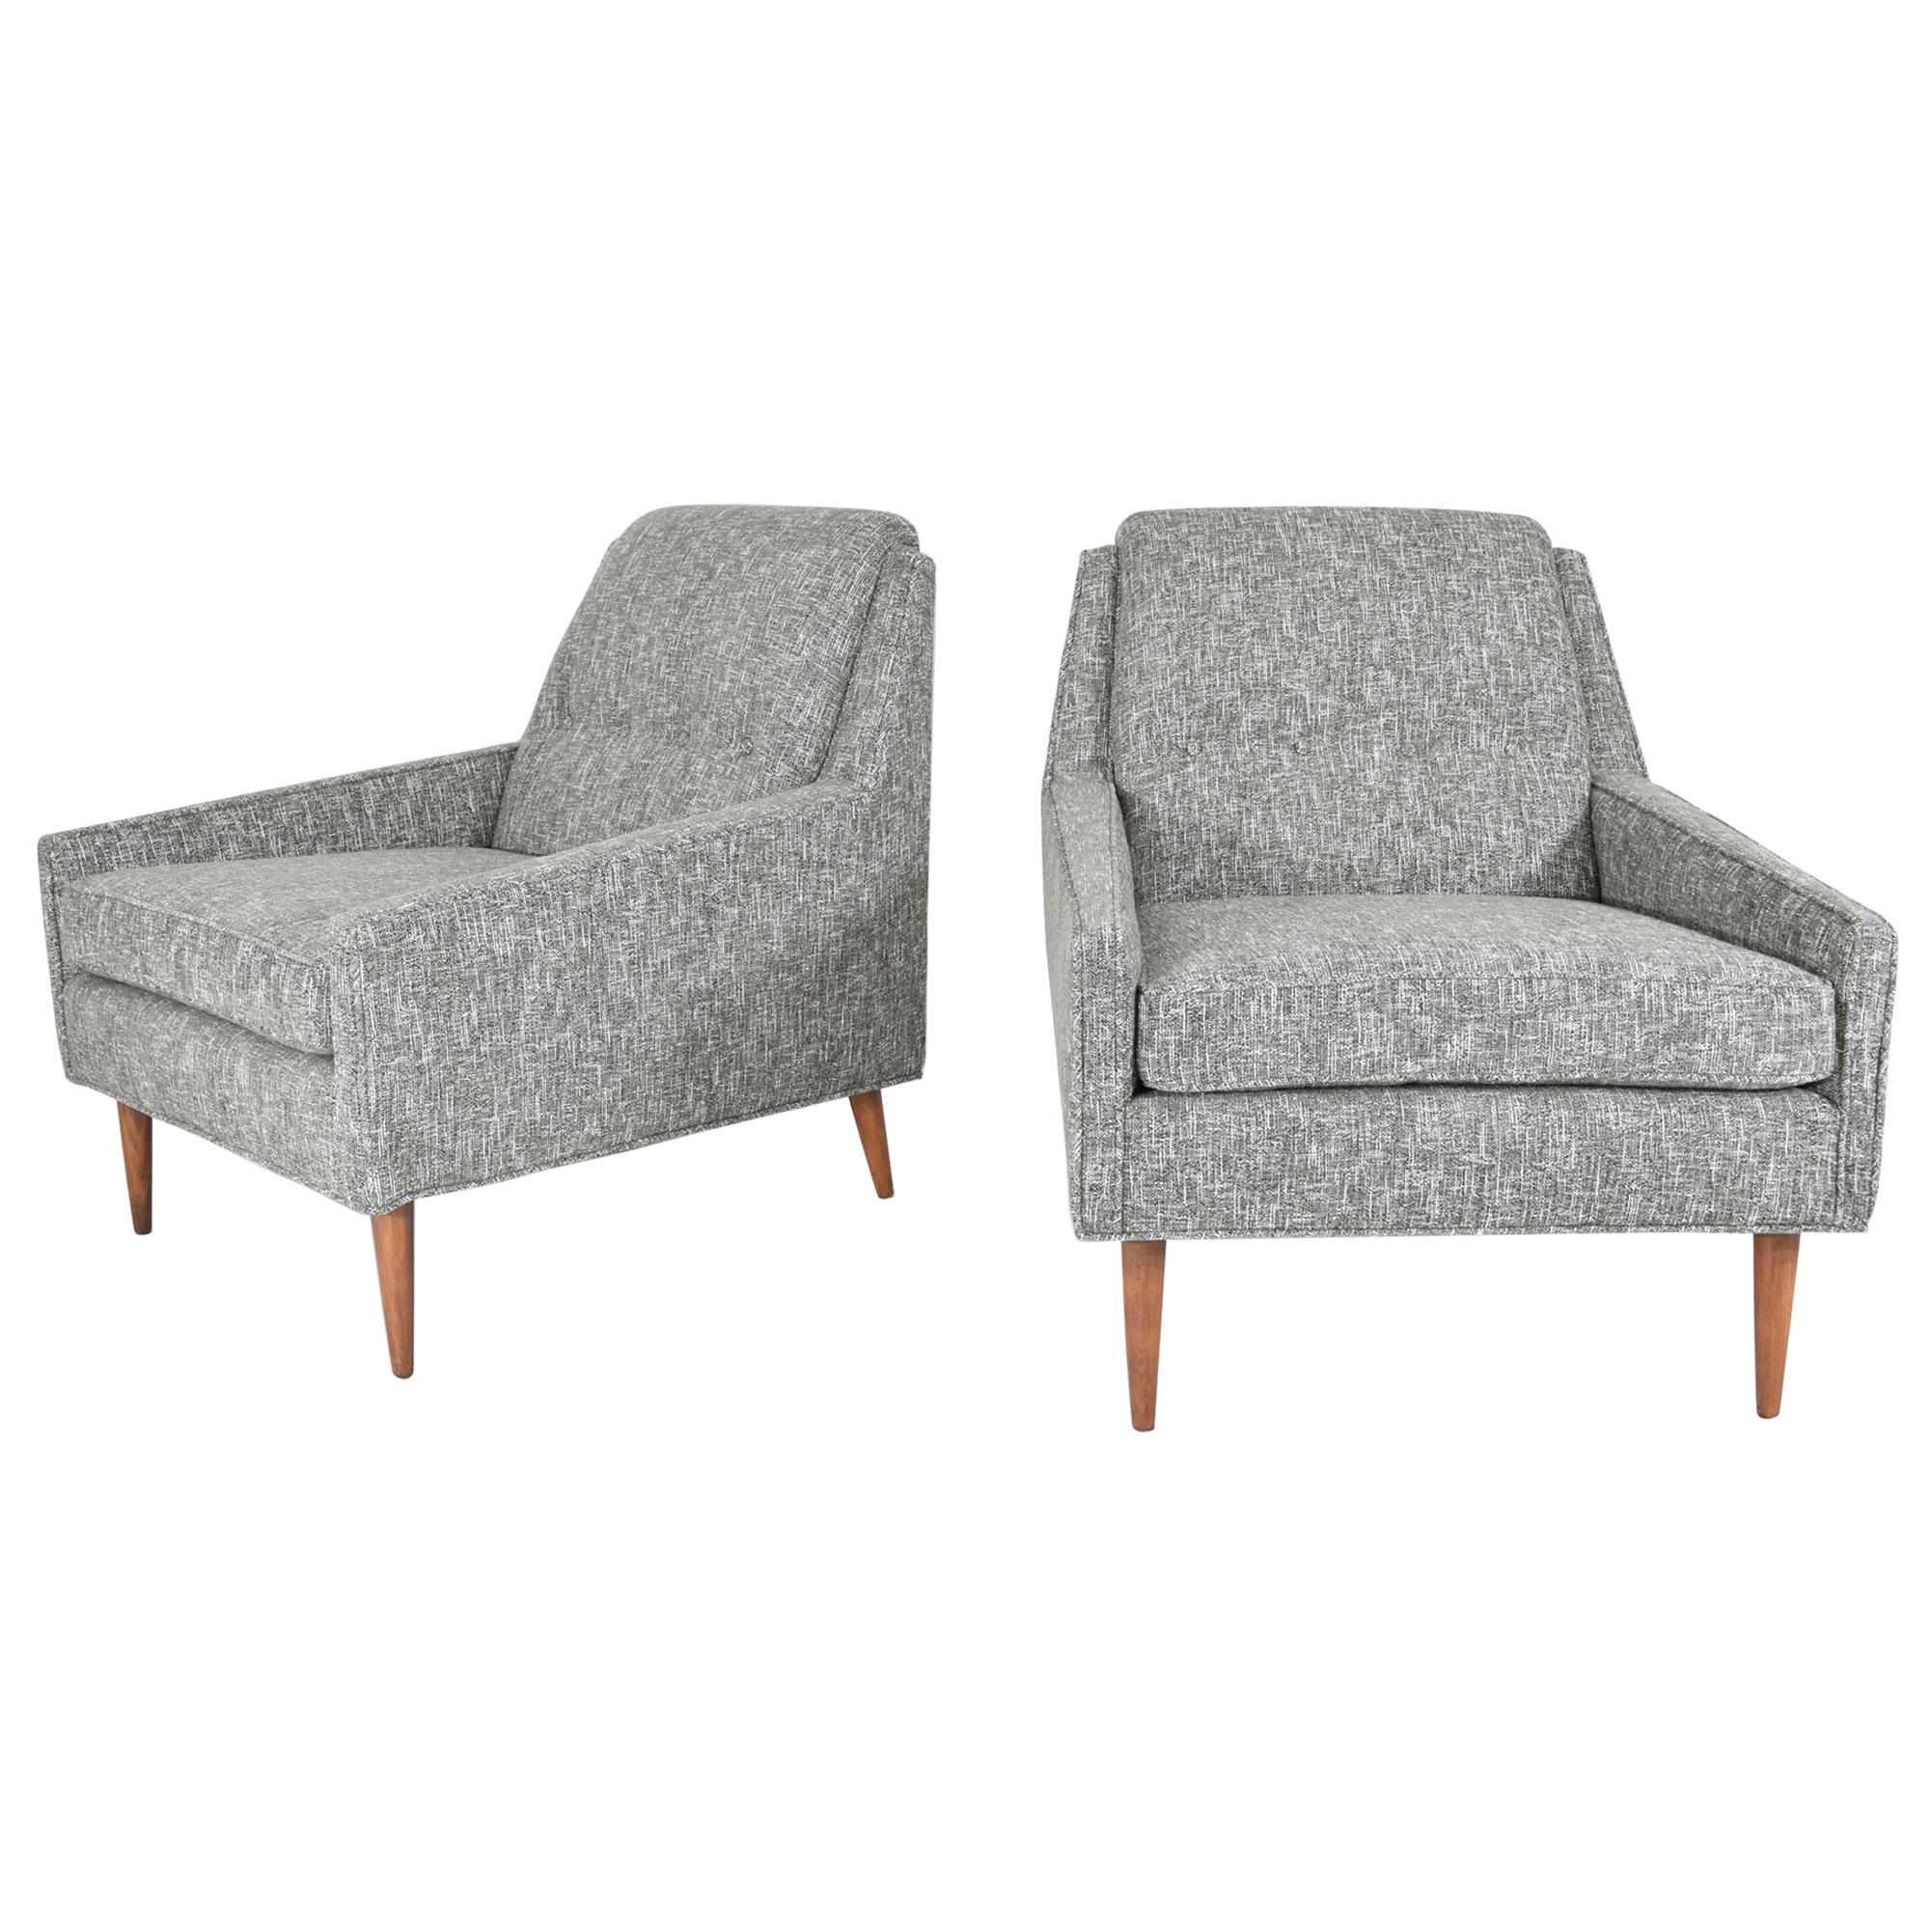 Mid-Century Modern Style Lounge Chairs in New Upholstery